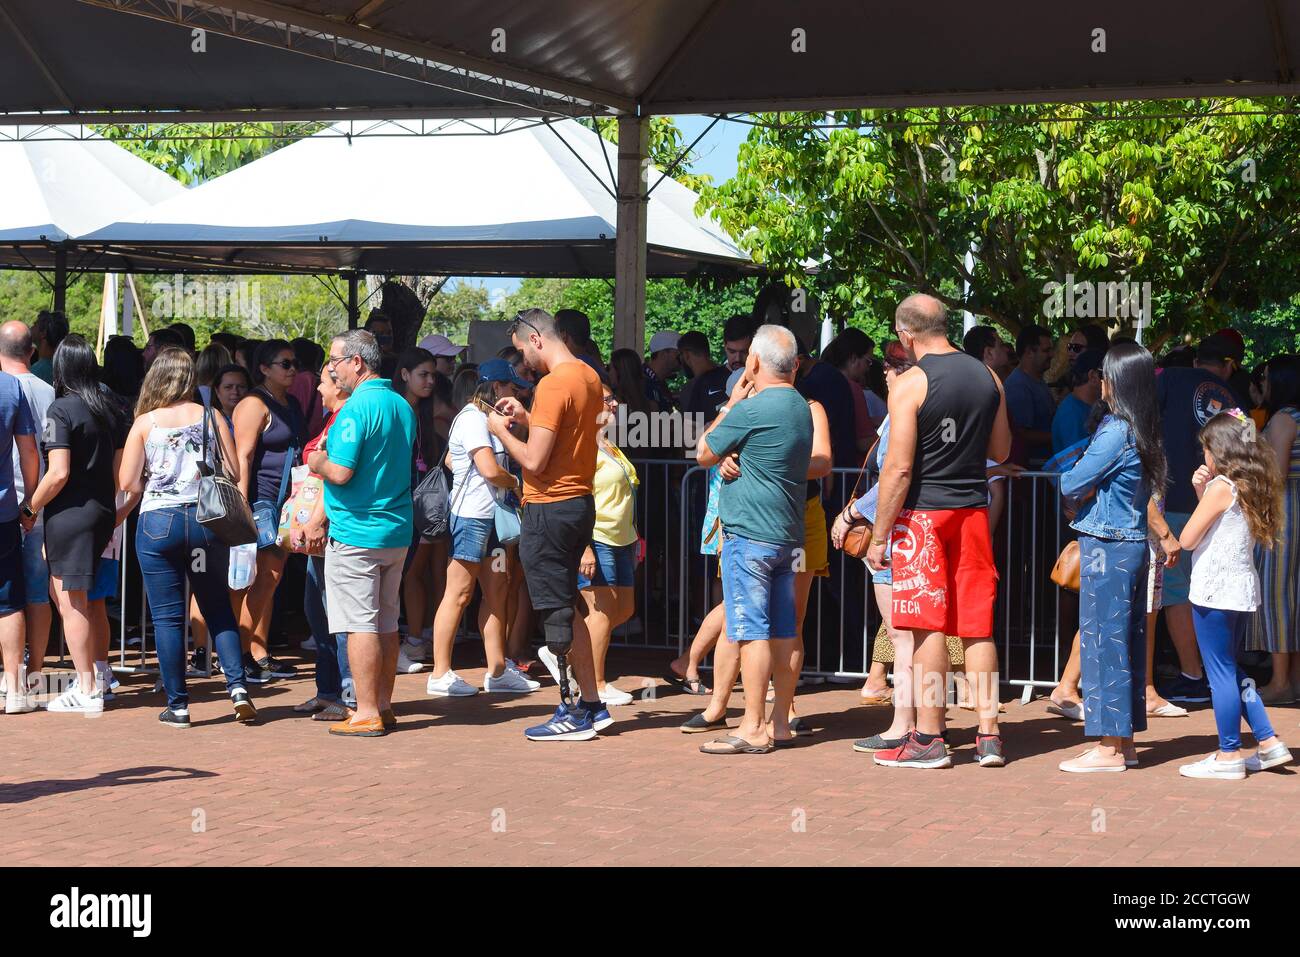 Long queue of tourists waiting to visit the Iguassu Falls in the Iguaçu National Park during Carnival holiday in Brazil, generating agglomeration line Stock Photo